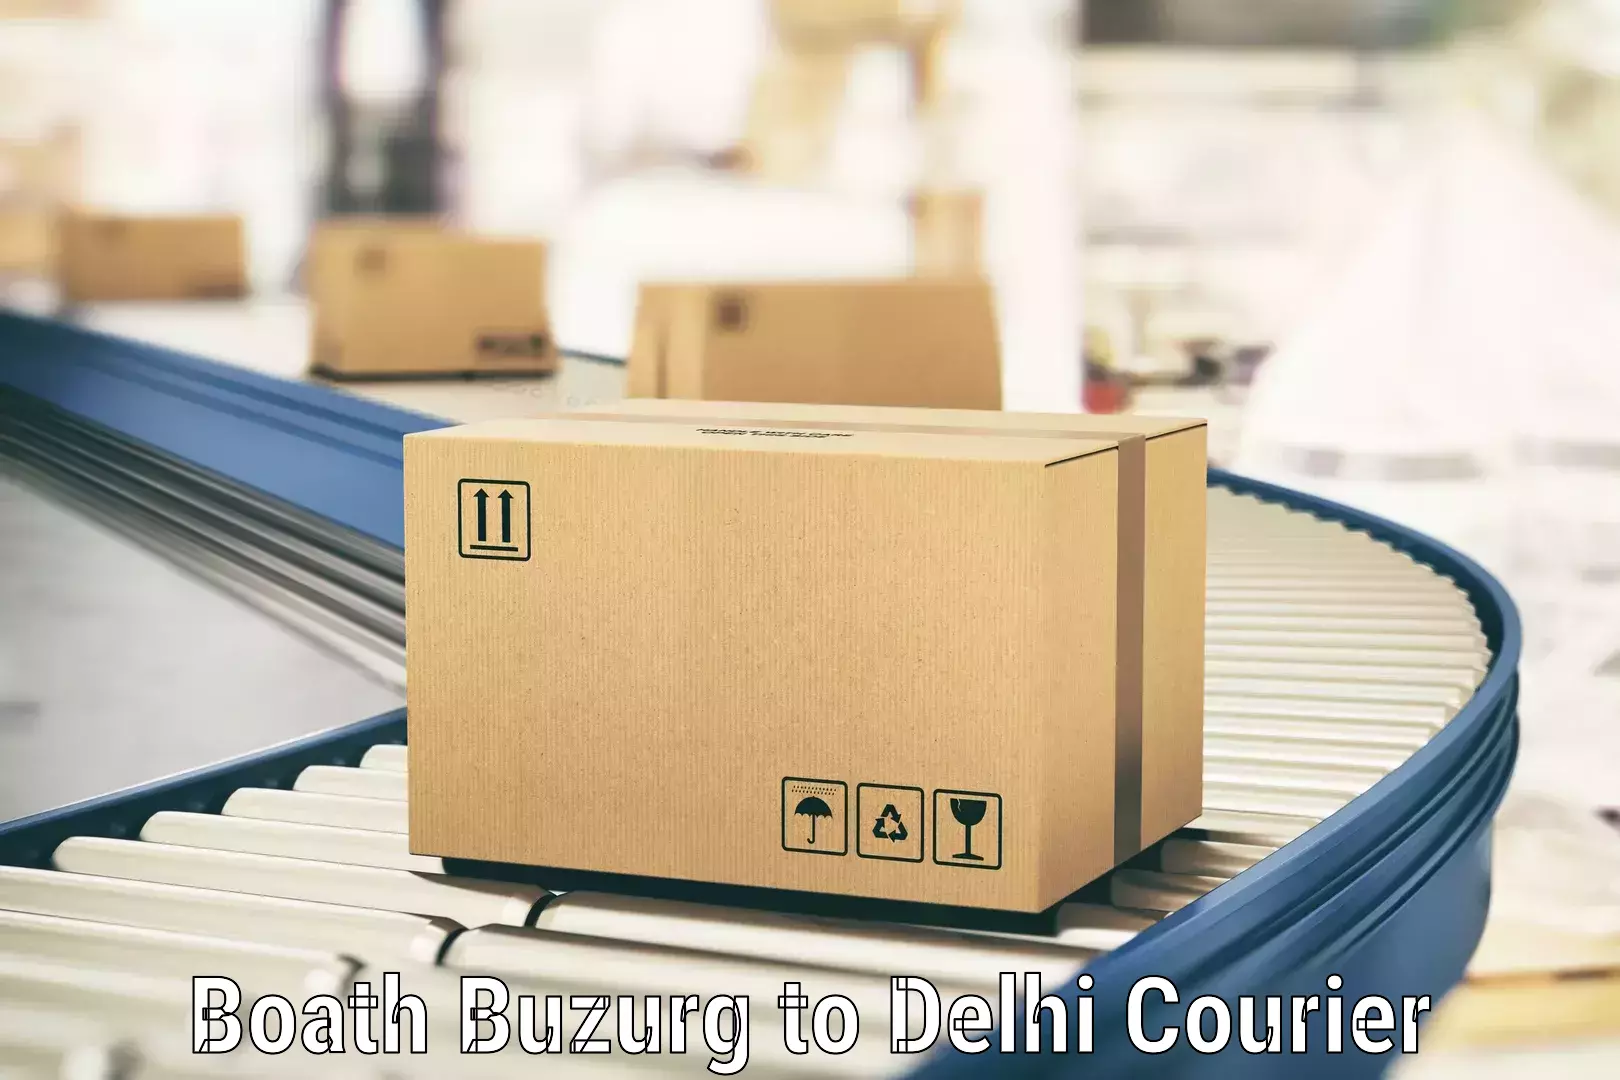 International courier networks Boath Buzurg to NCR